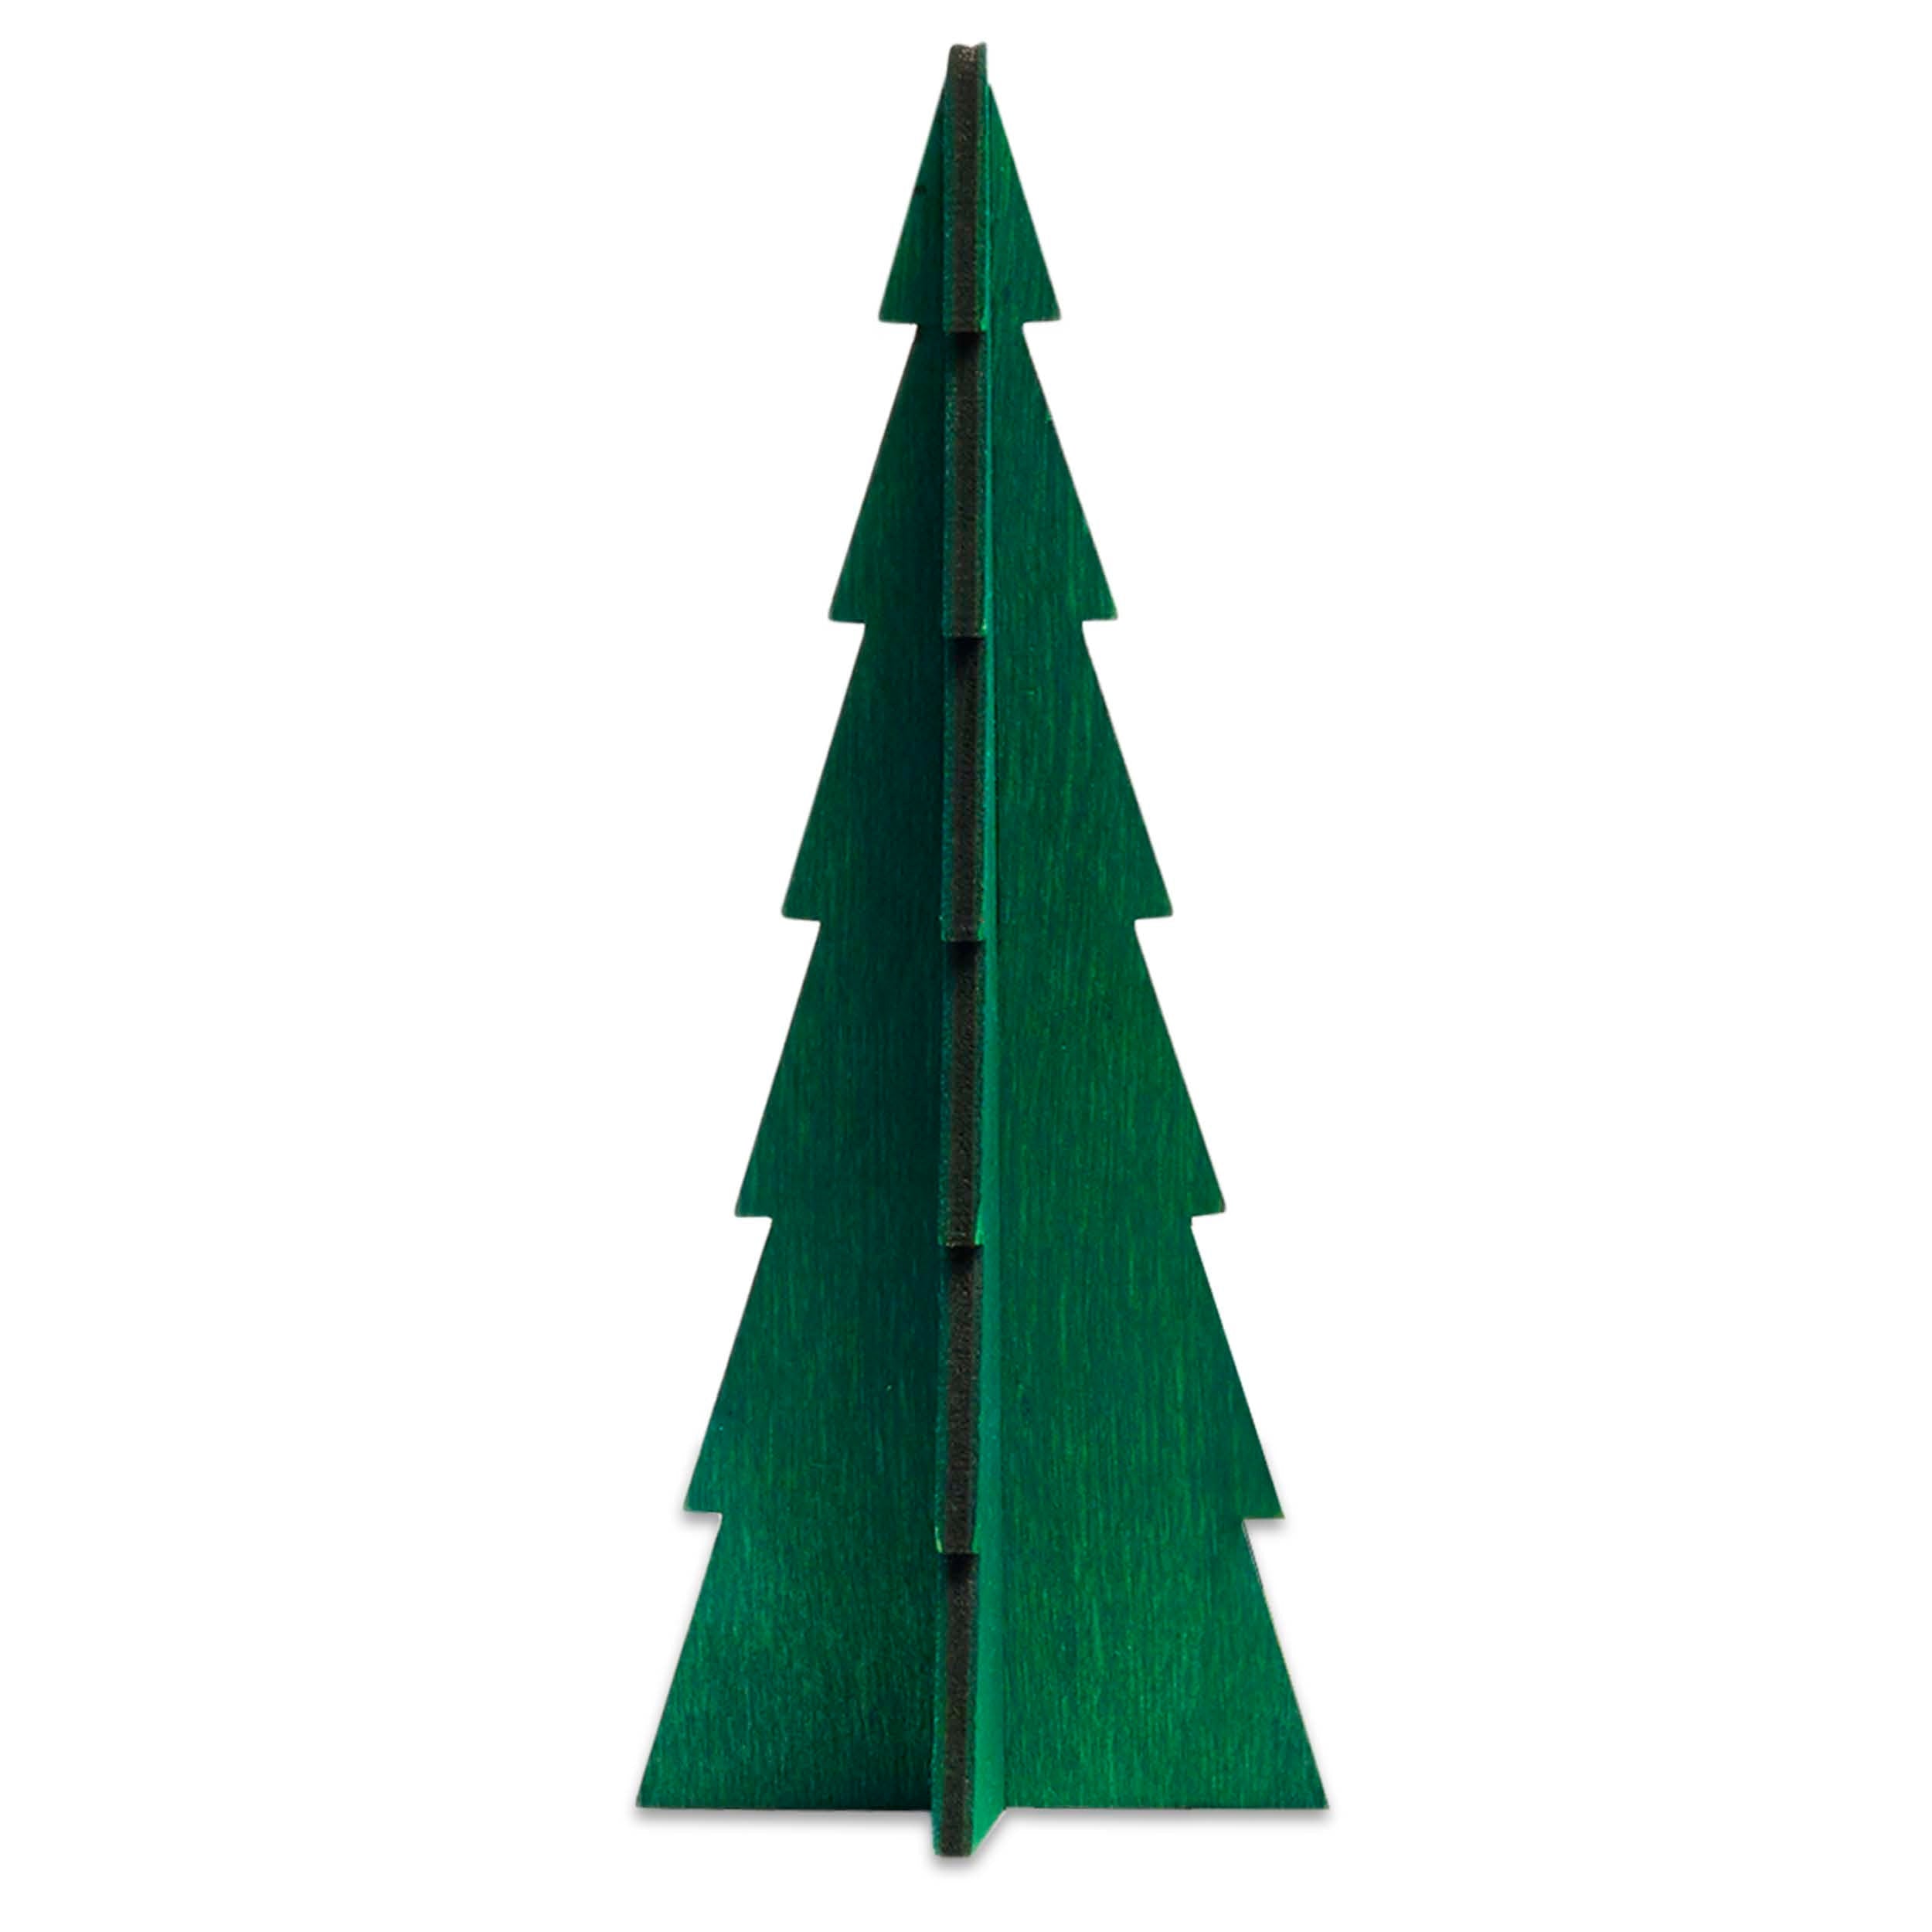 Tannenbaum Wood Trees (17 Inch) - Green Color | Image 1 | From the Tannenbaum Collection | Elegantly crafted with natural plywood for long lasting use | Available in white color | texxture home